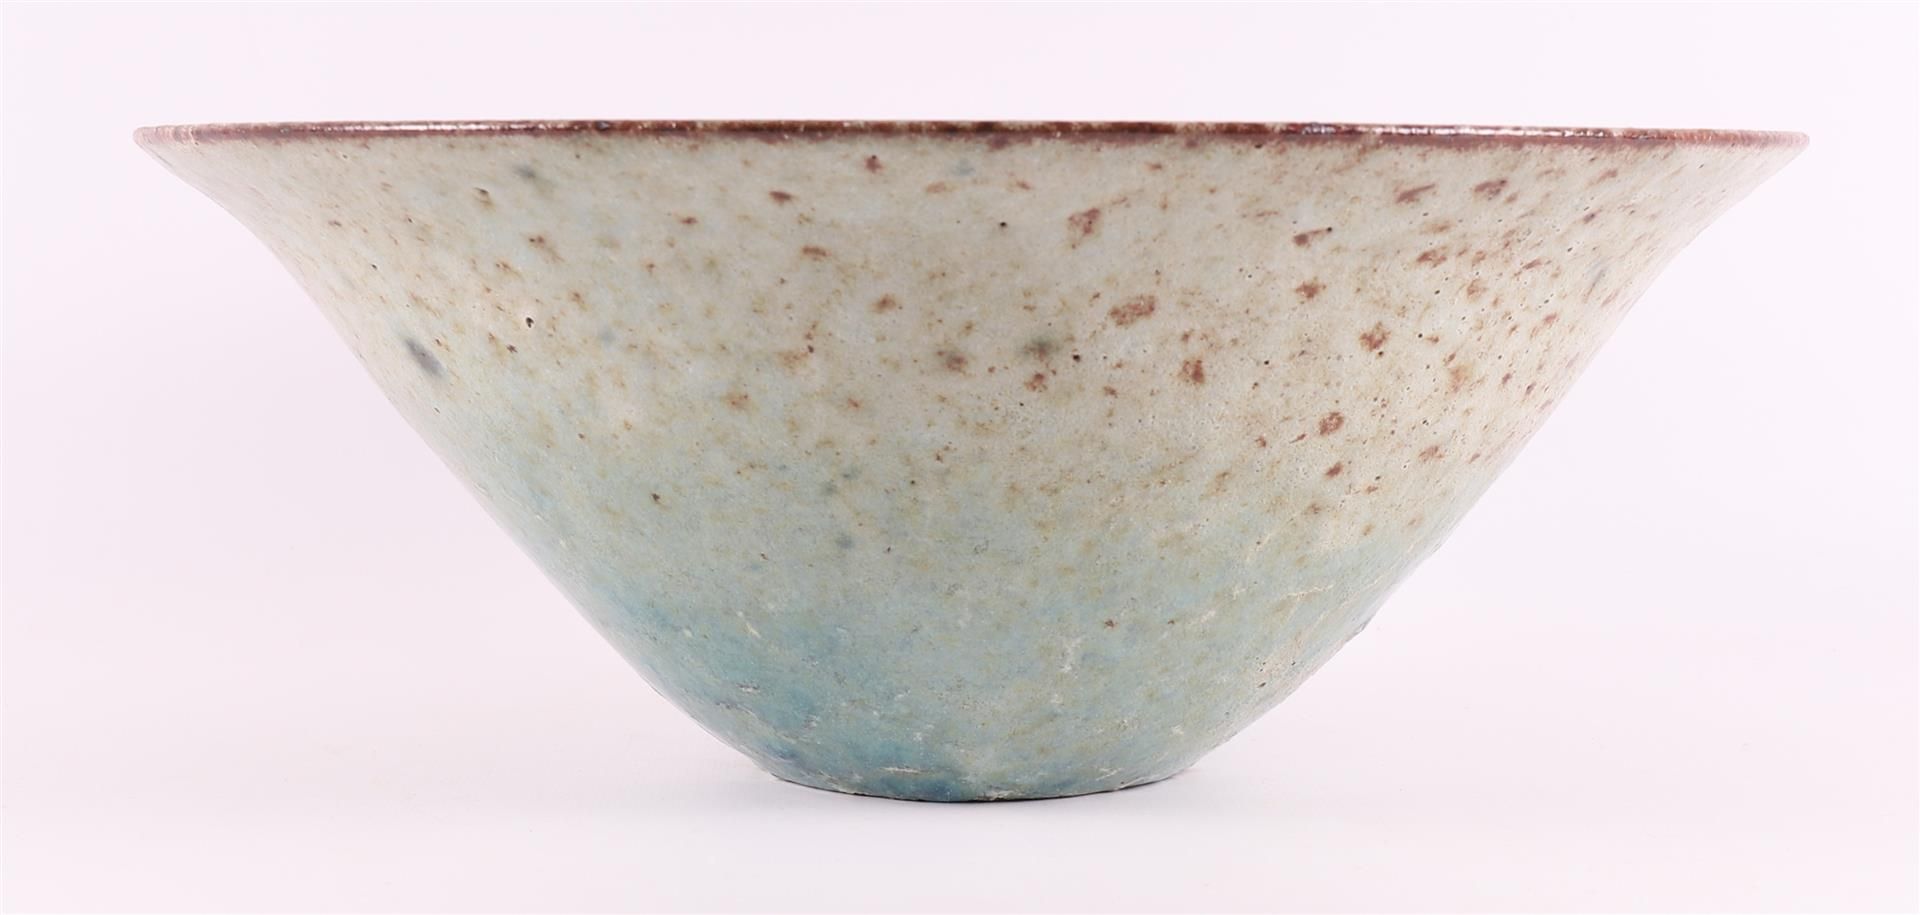 A conical cream-glazed earthenware bowl, marked: Zaalberg, ca. 1960 - Image 2 of 4